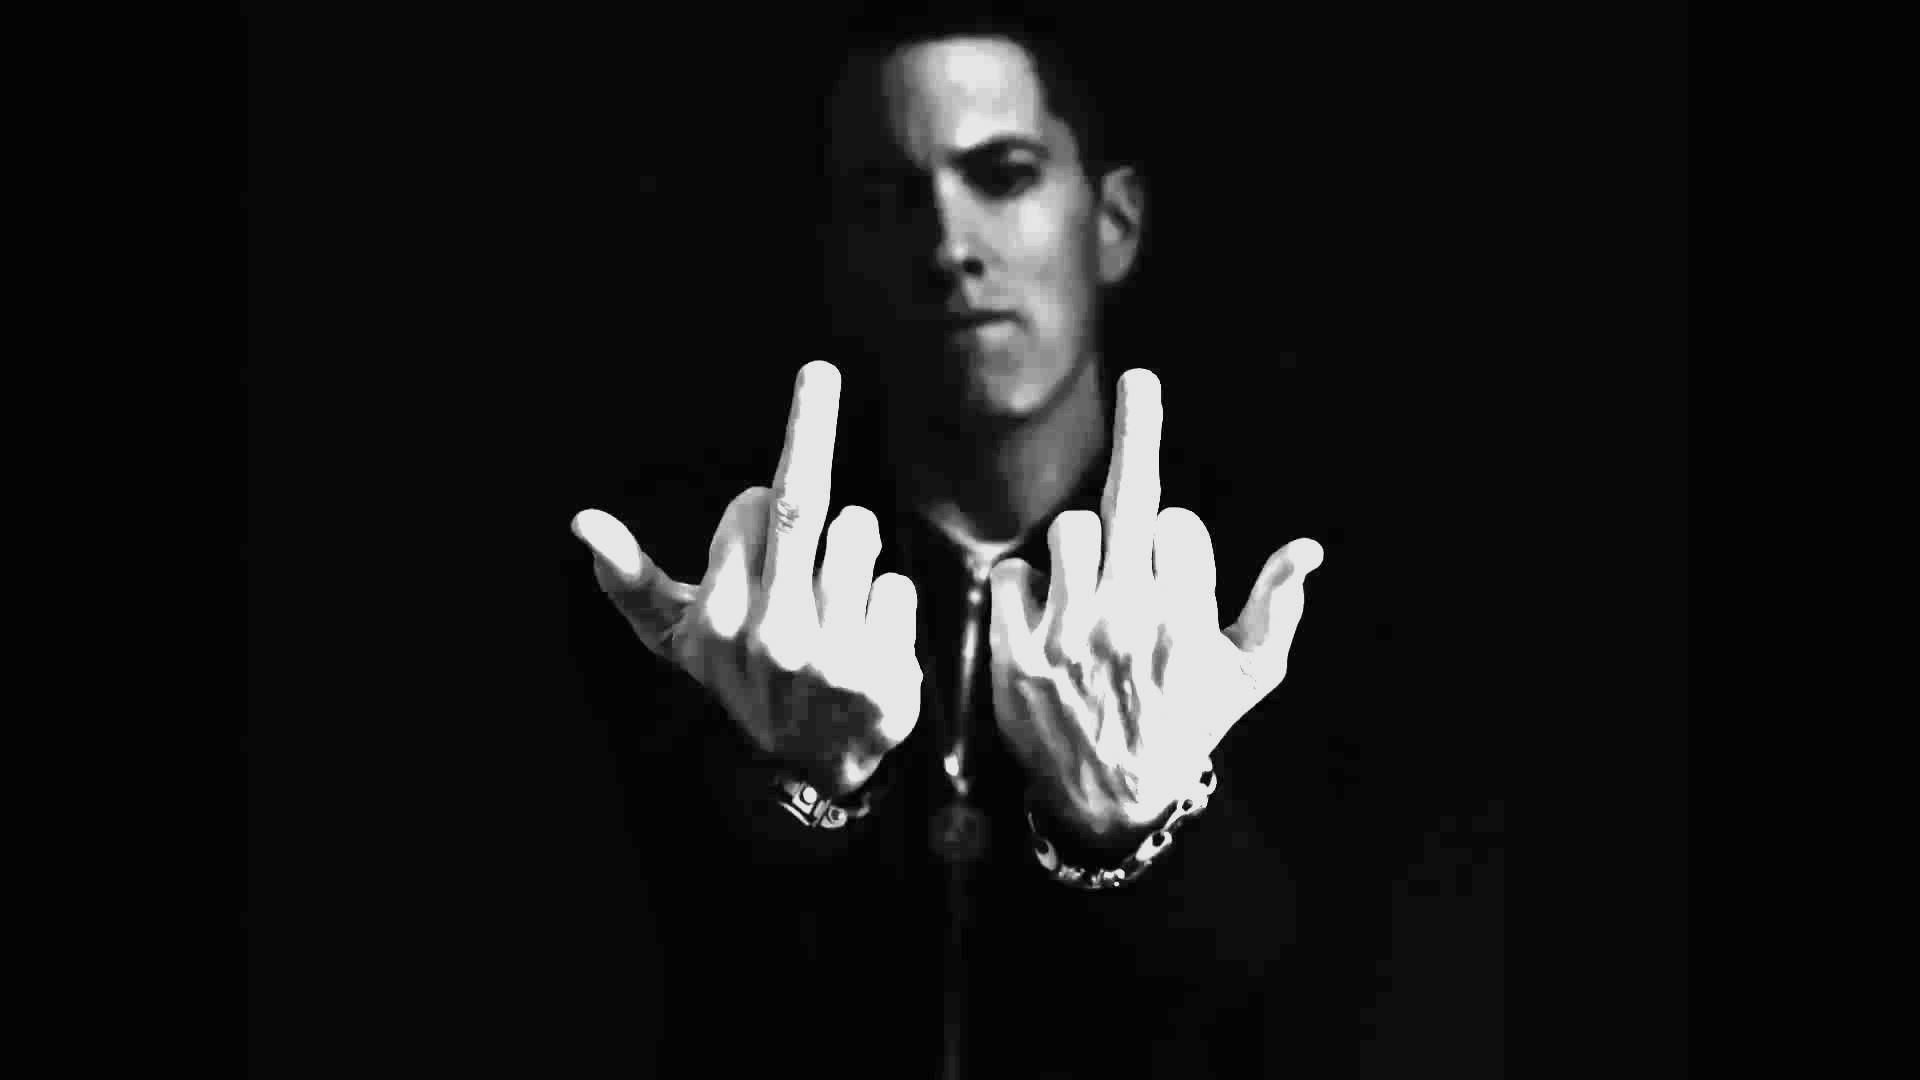 Eminem Wallpapers Hd 1920×1080 Eminem Wallpapers Hd - Eminem Showing Middle Finger - HD Wallpaper 